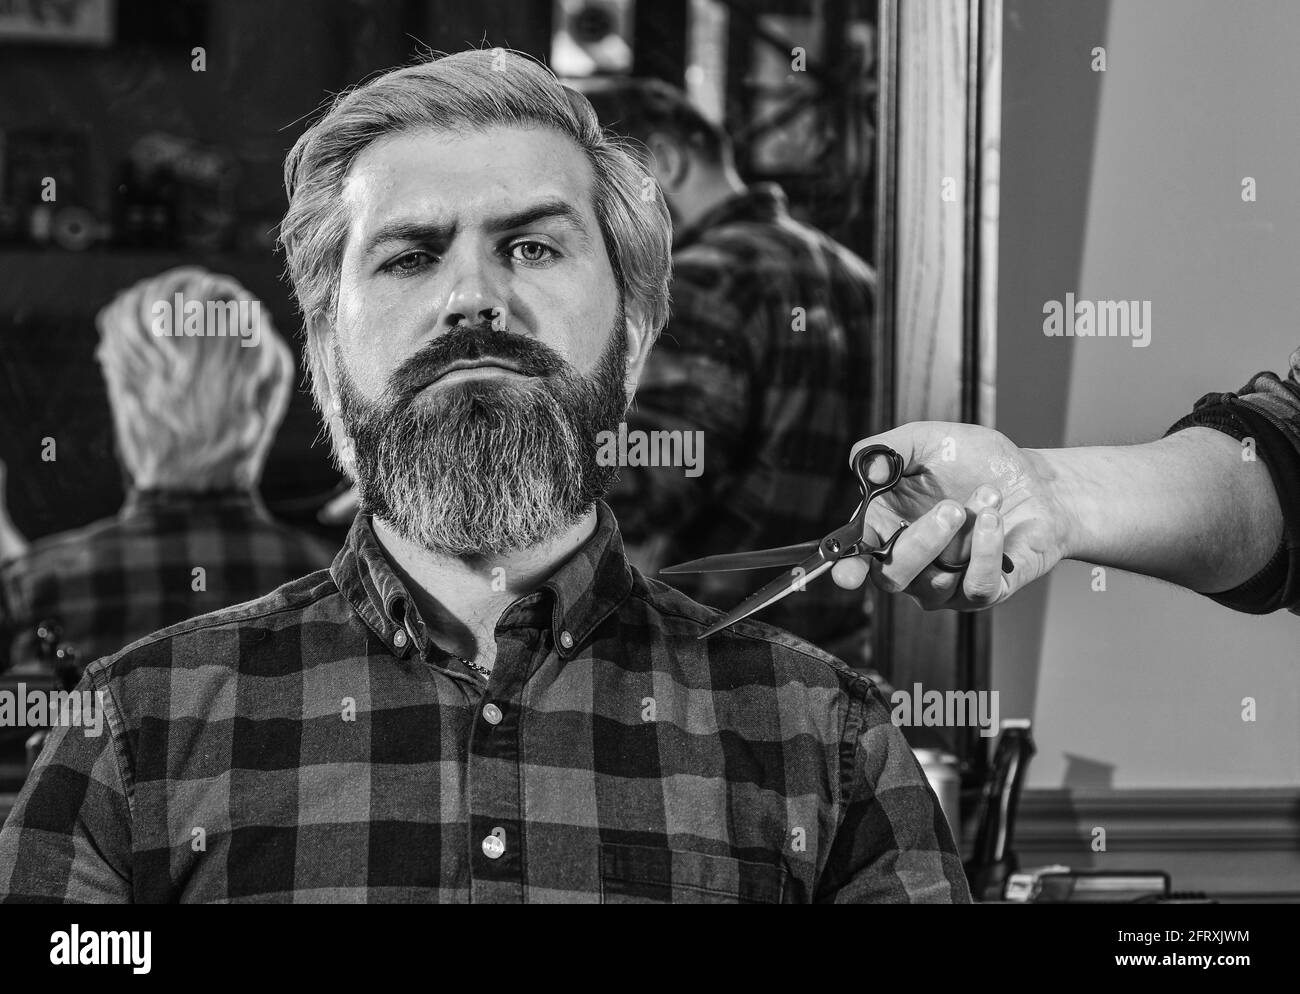 Making hair look magical. hairdresser cutting hair of male client. Hairstylist serving client at barber shop. Personal stylist barber. retro and Stock Photo